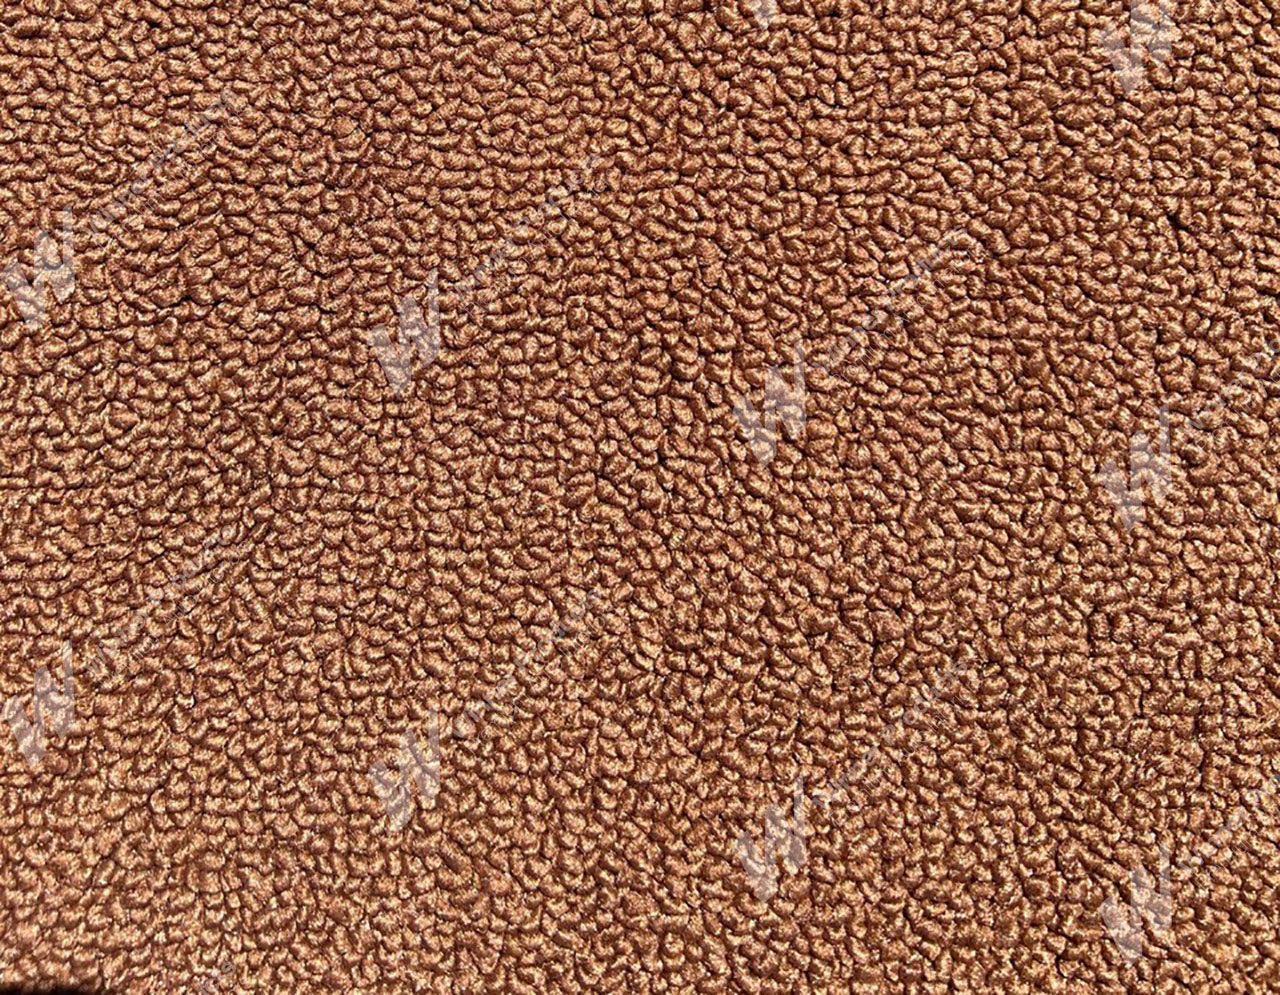 Ford Falcon 500 XA 500 Coupe P Parchment Carpet (Image 1 of 1)